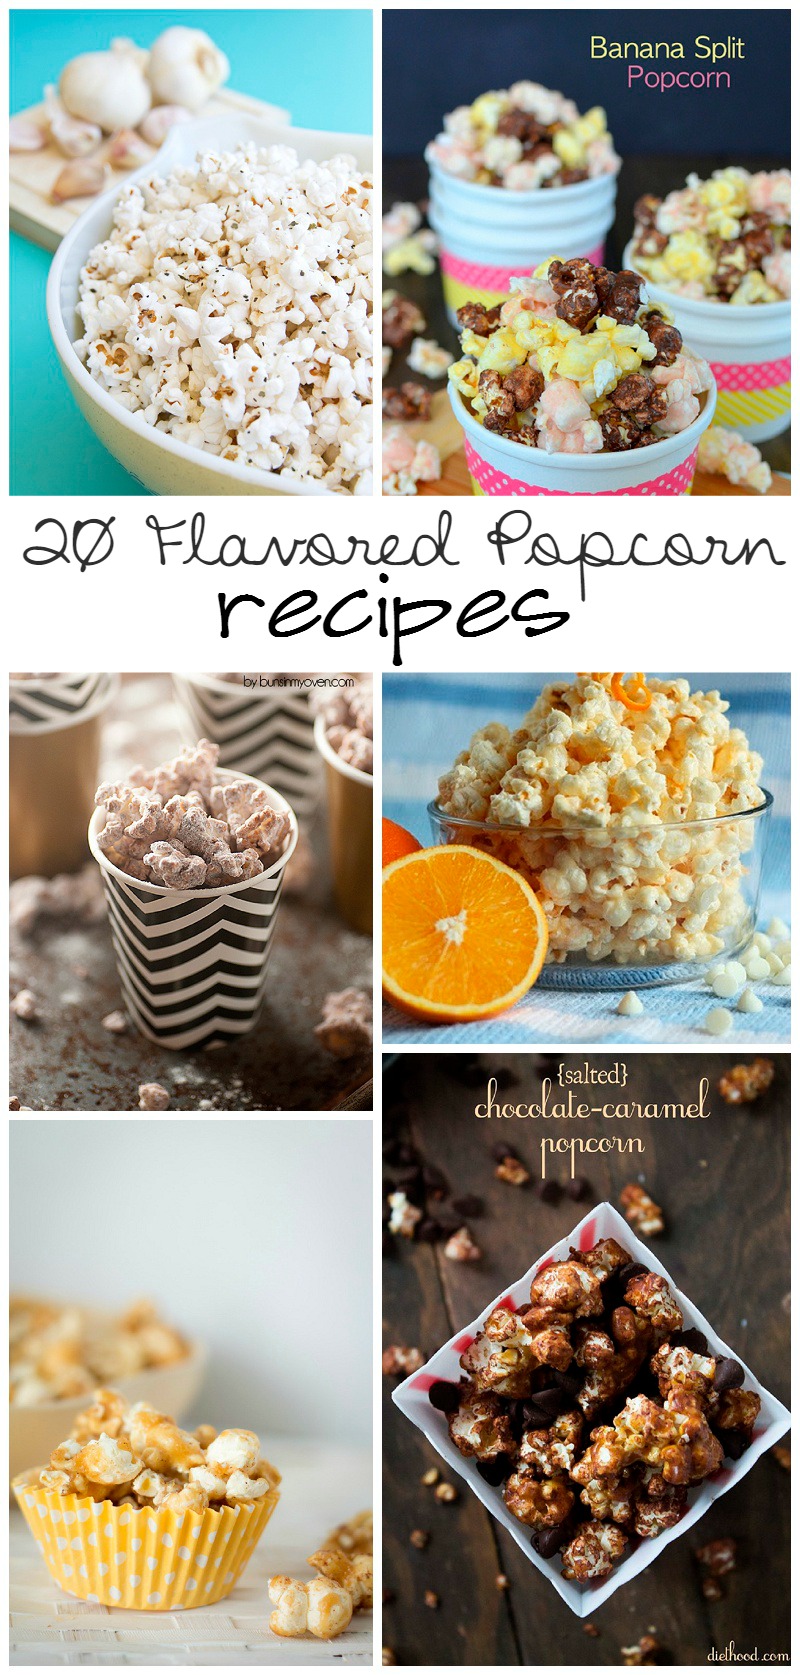 20 Flavored Popcorn recipes to help satisfy any sweet & salty desire!